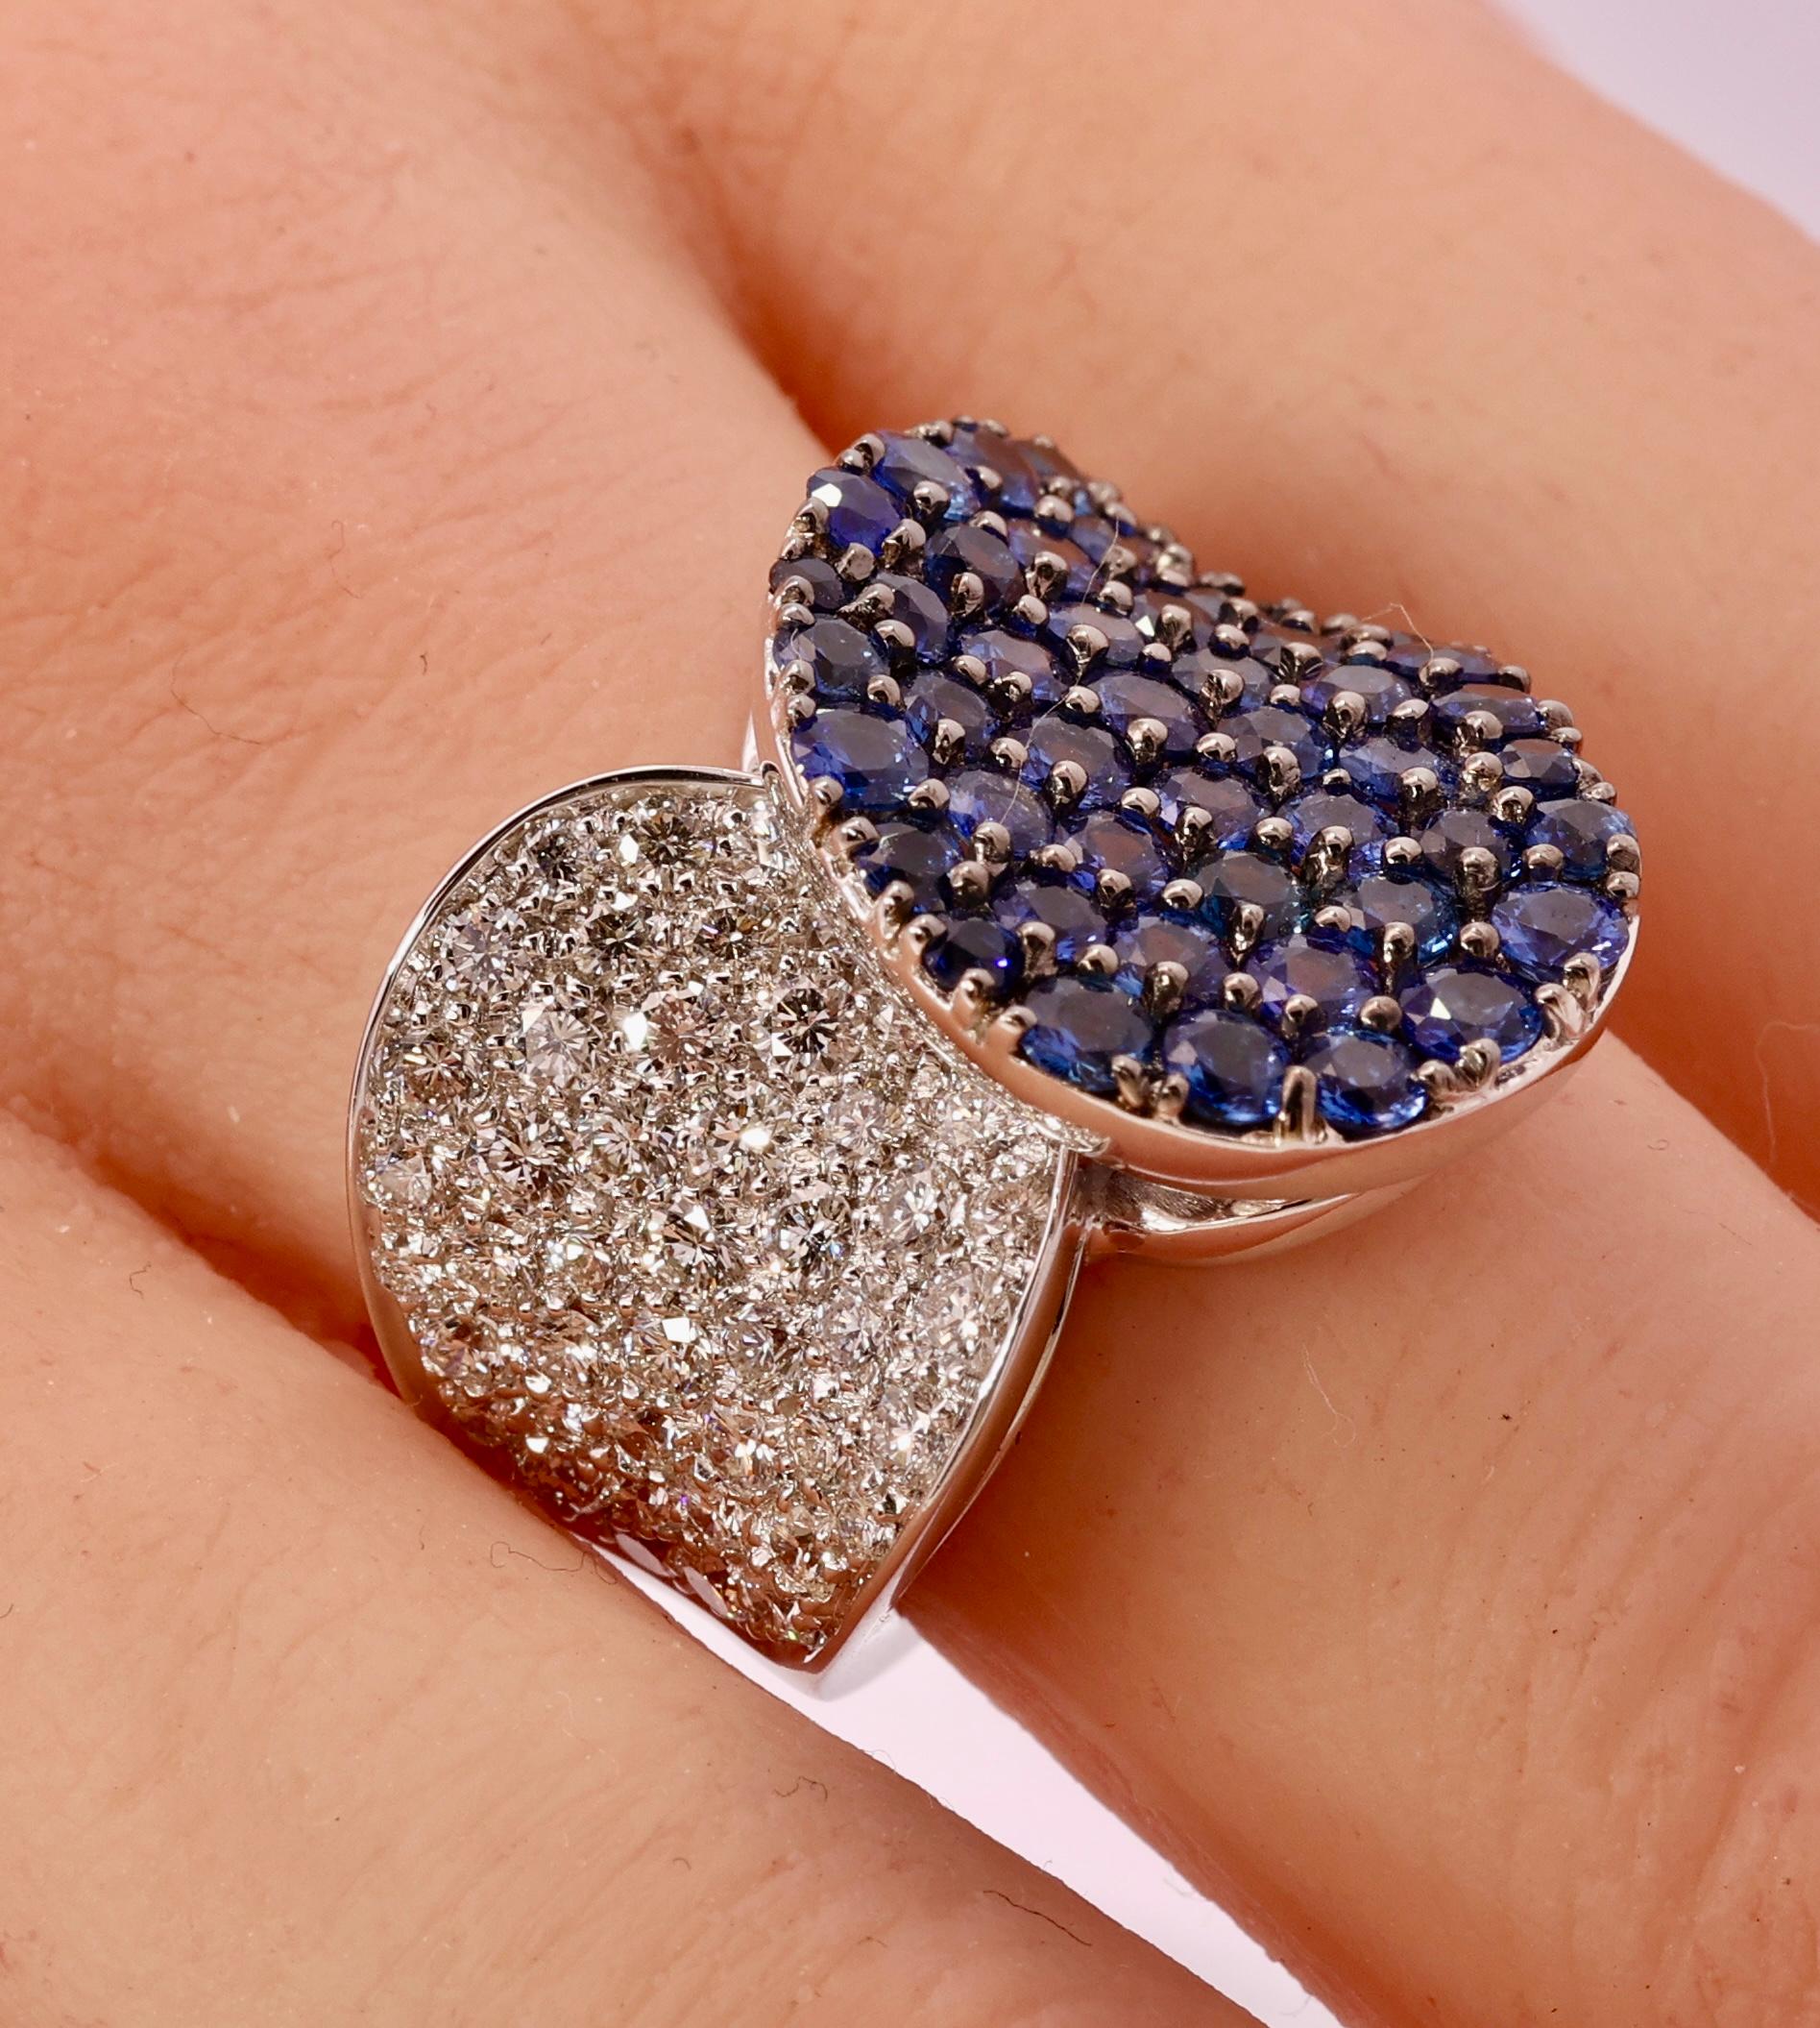 Stunning 18kt White Gold Ring with 3.2 ct. Sapphires and 1.85 ct. Diamonds 

Material: 18 kt. white gold

Diamonds: Brilliant cut diamonds, together approx. 1.85 ct.

Sapphires: Blue sapphires together approx. 3.20 ct.

Ring size: 53.1 EU / 6.5 US (